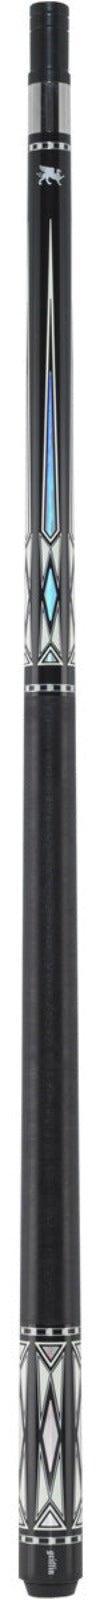 Griffin GR40 Pool Cue -Griffin